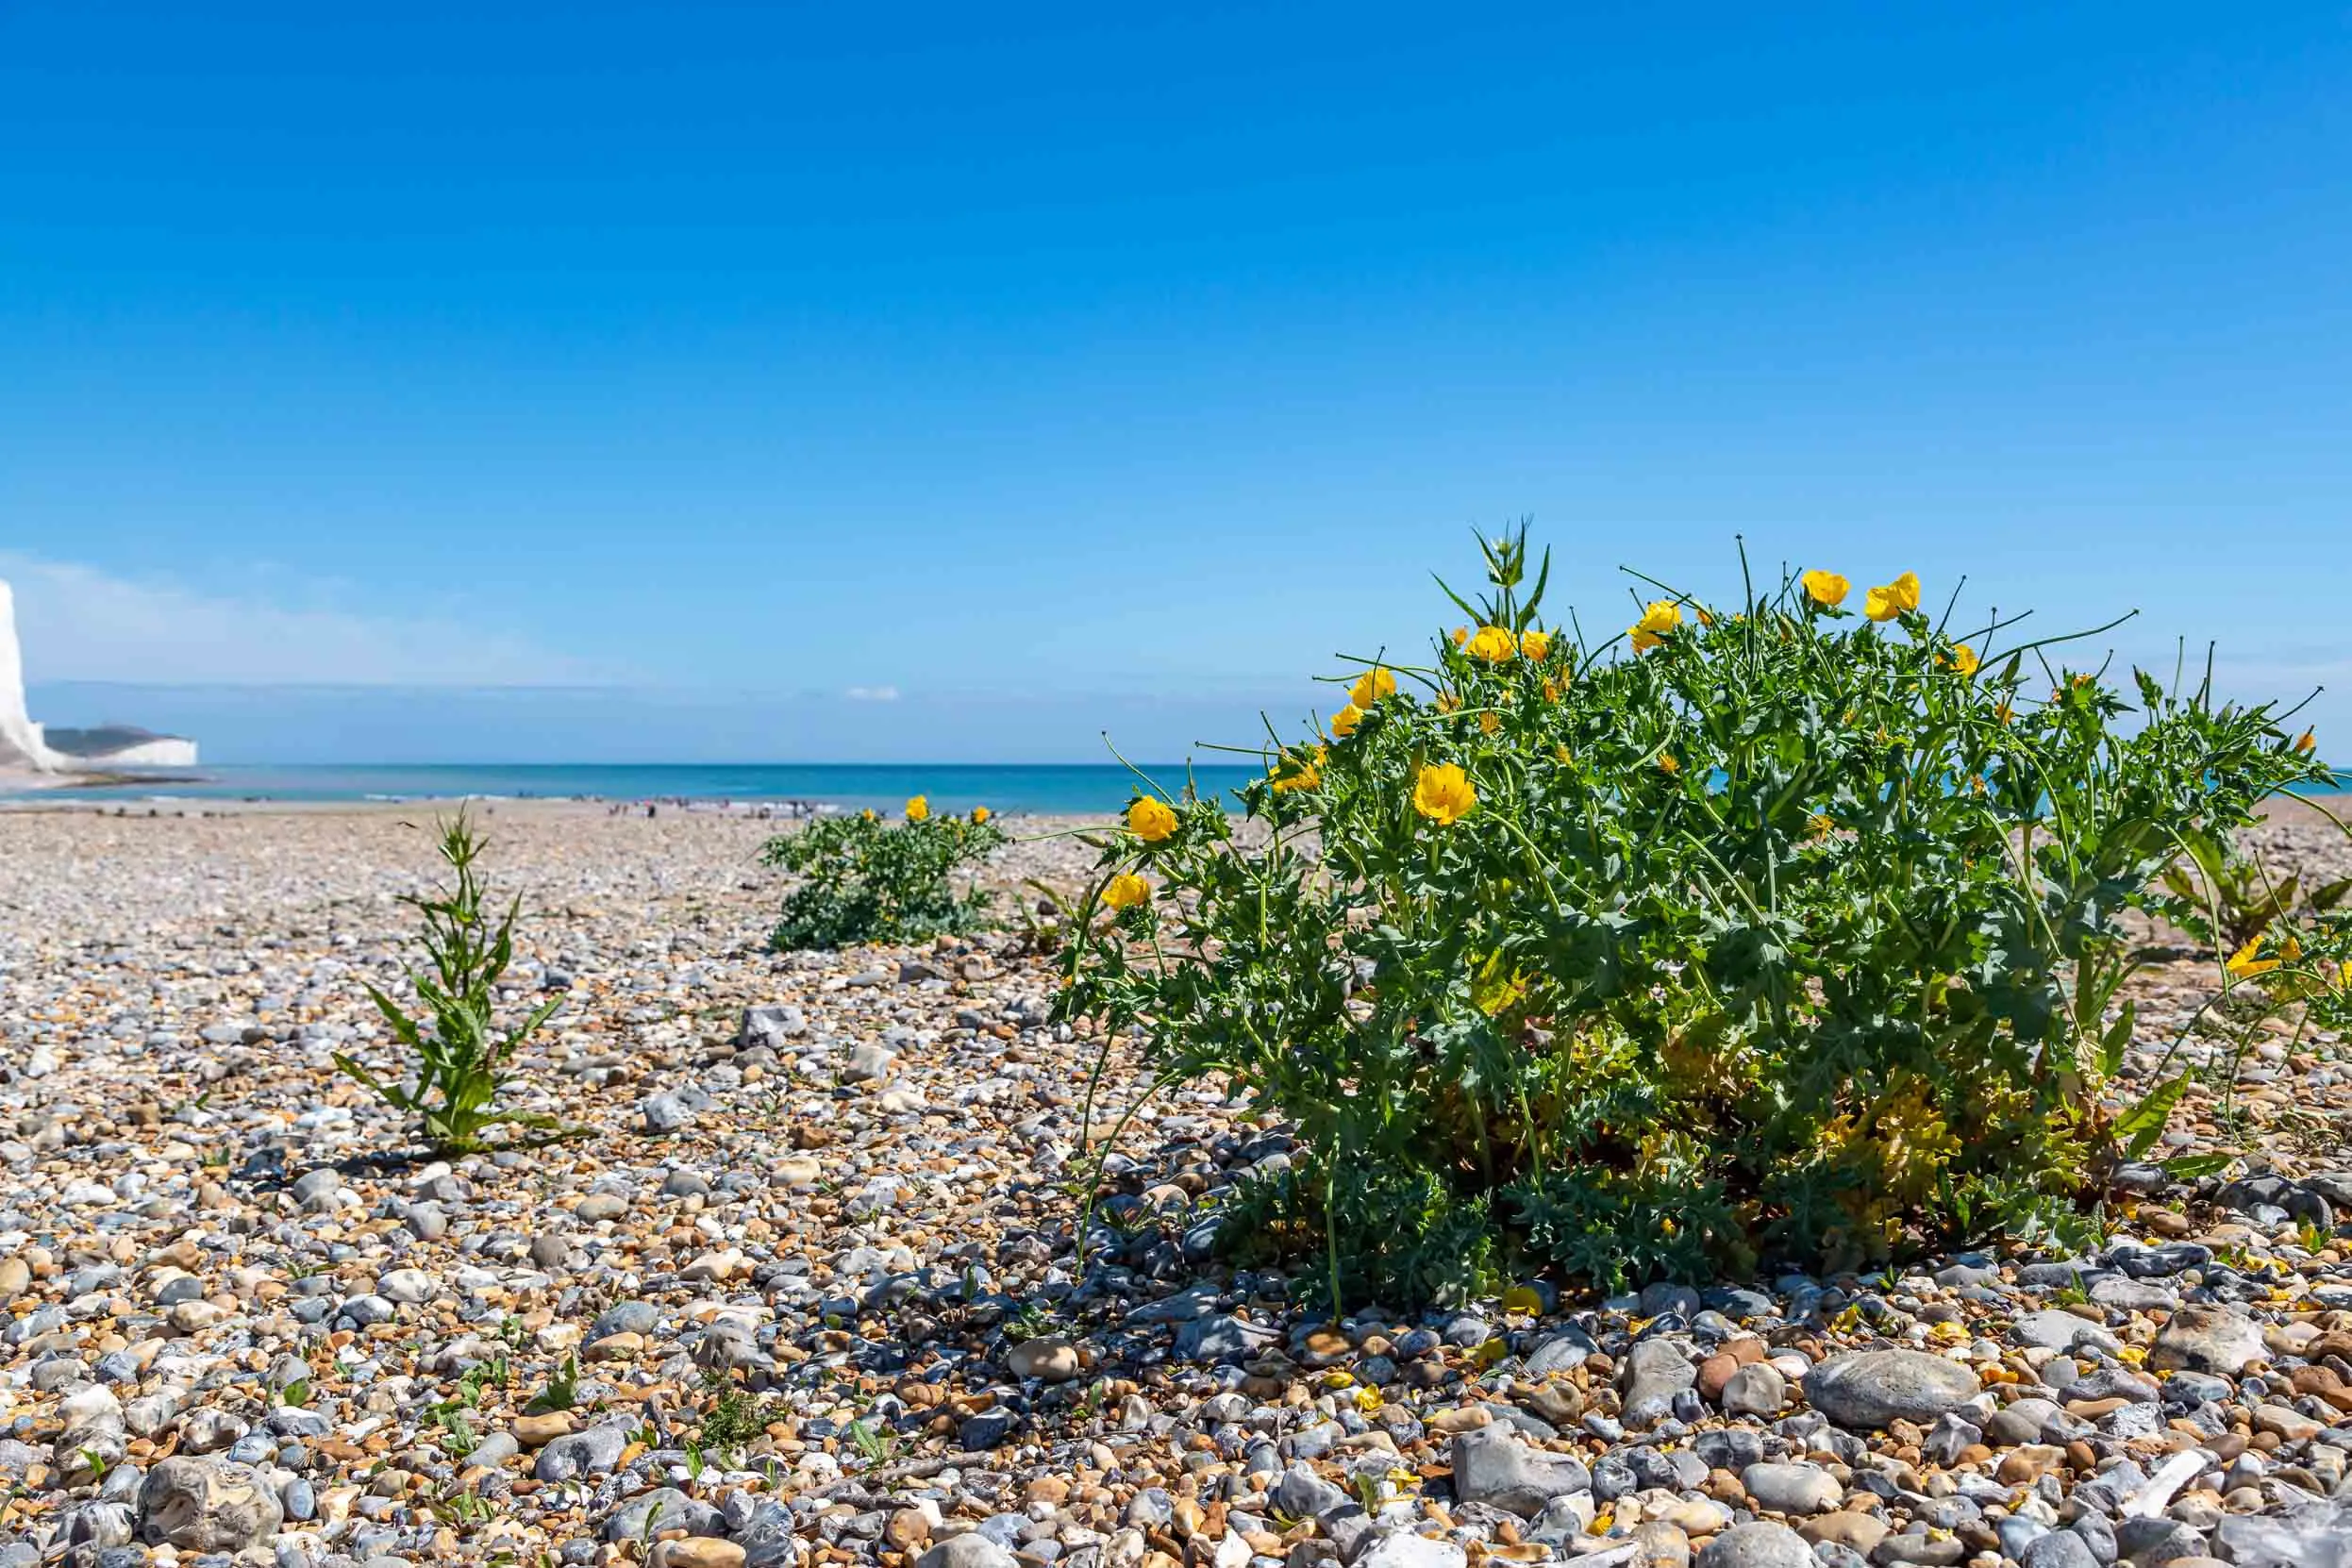 A gathering of Yellow Horned Poppy flowers growing on a pebbled beach against a bring blue sky, with a view of the sea in the distance.